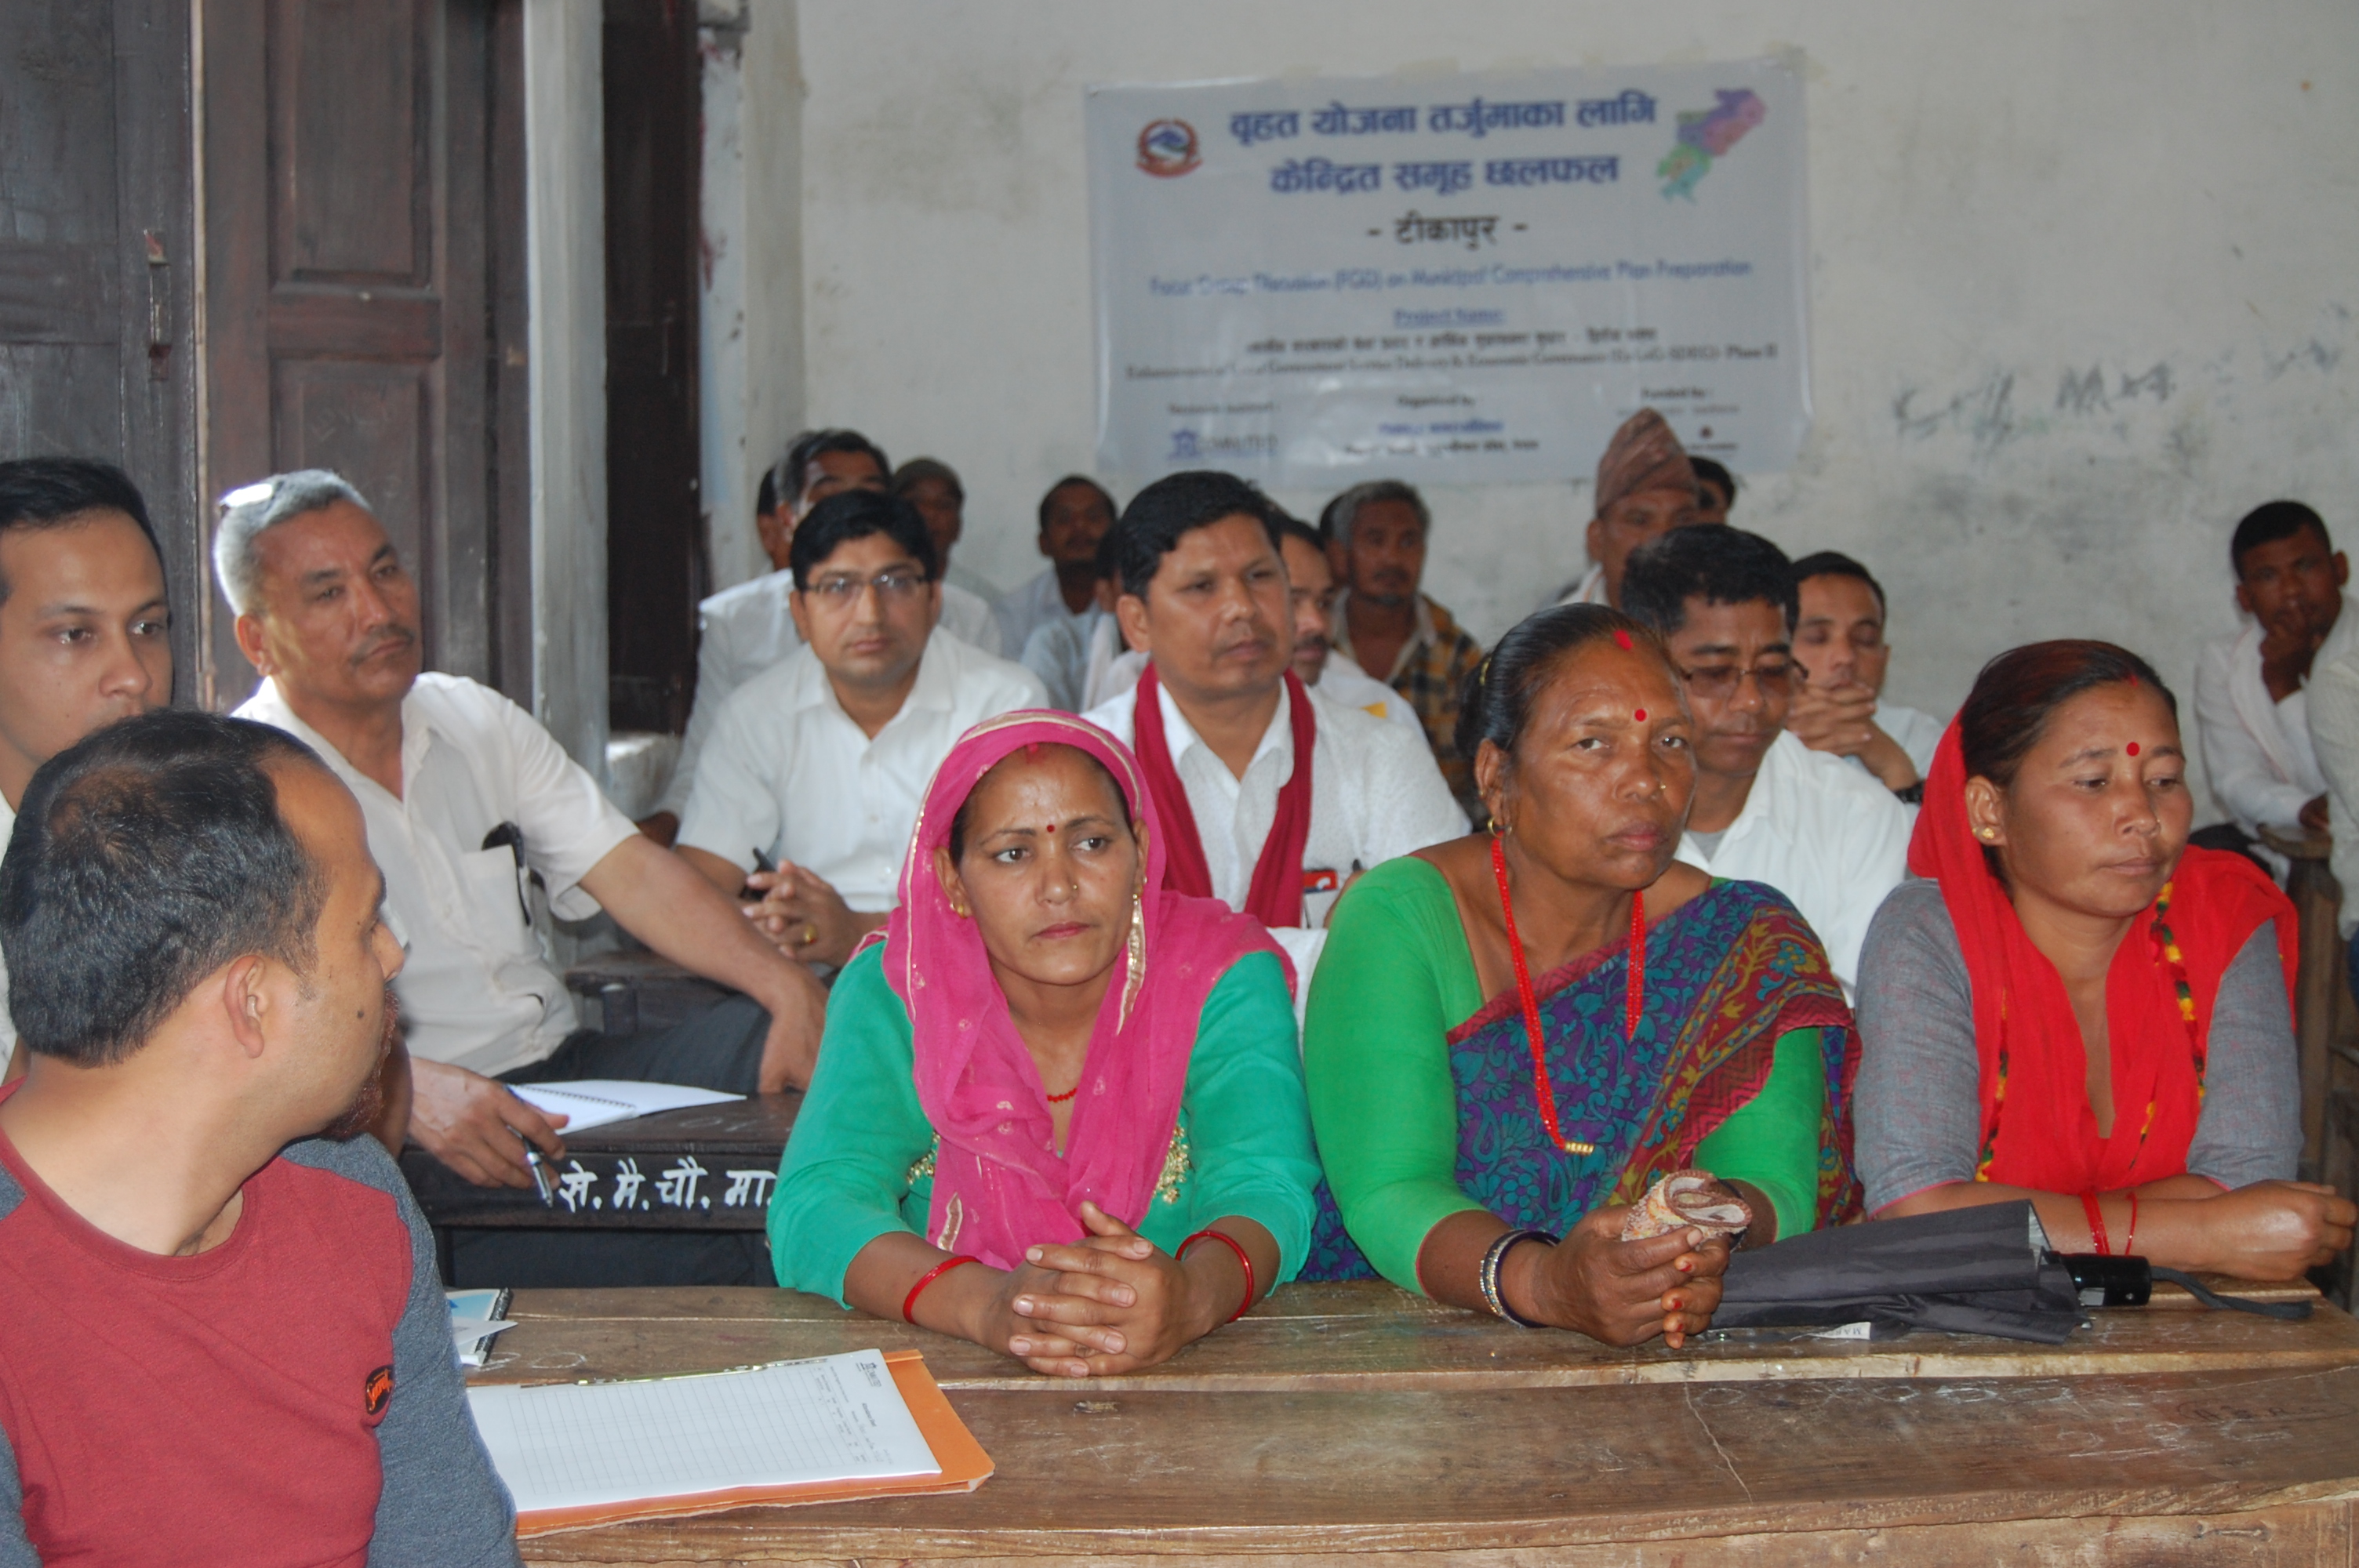 Focus Group Discussion in Tikapur Municipality for the development of Municipal Comprehensive Plan.